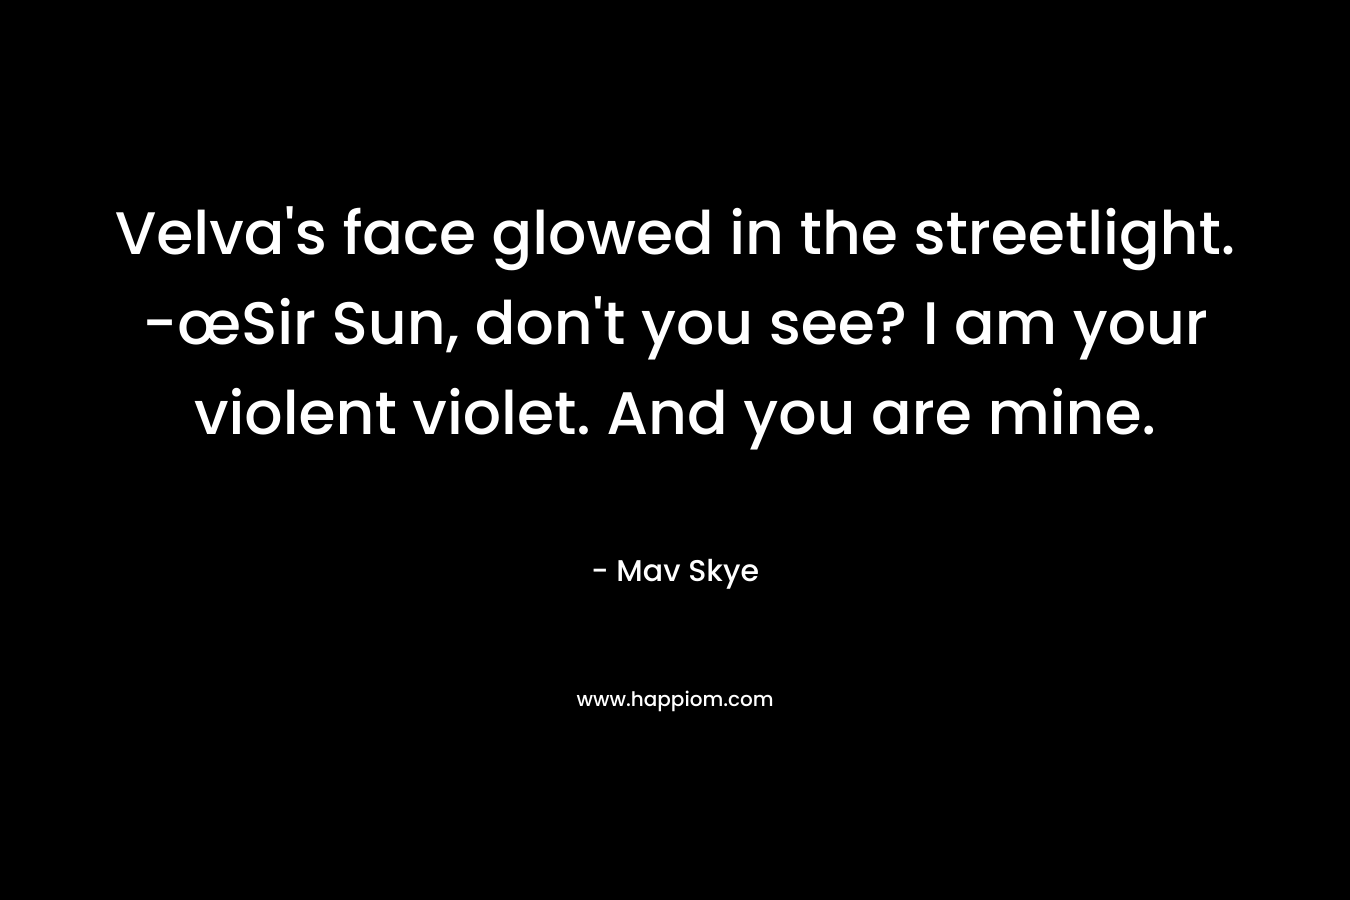 Velva's face glowed in the streetlight. -œSir Sun, don't you see? I am your violent violet. And you are mine.